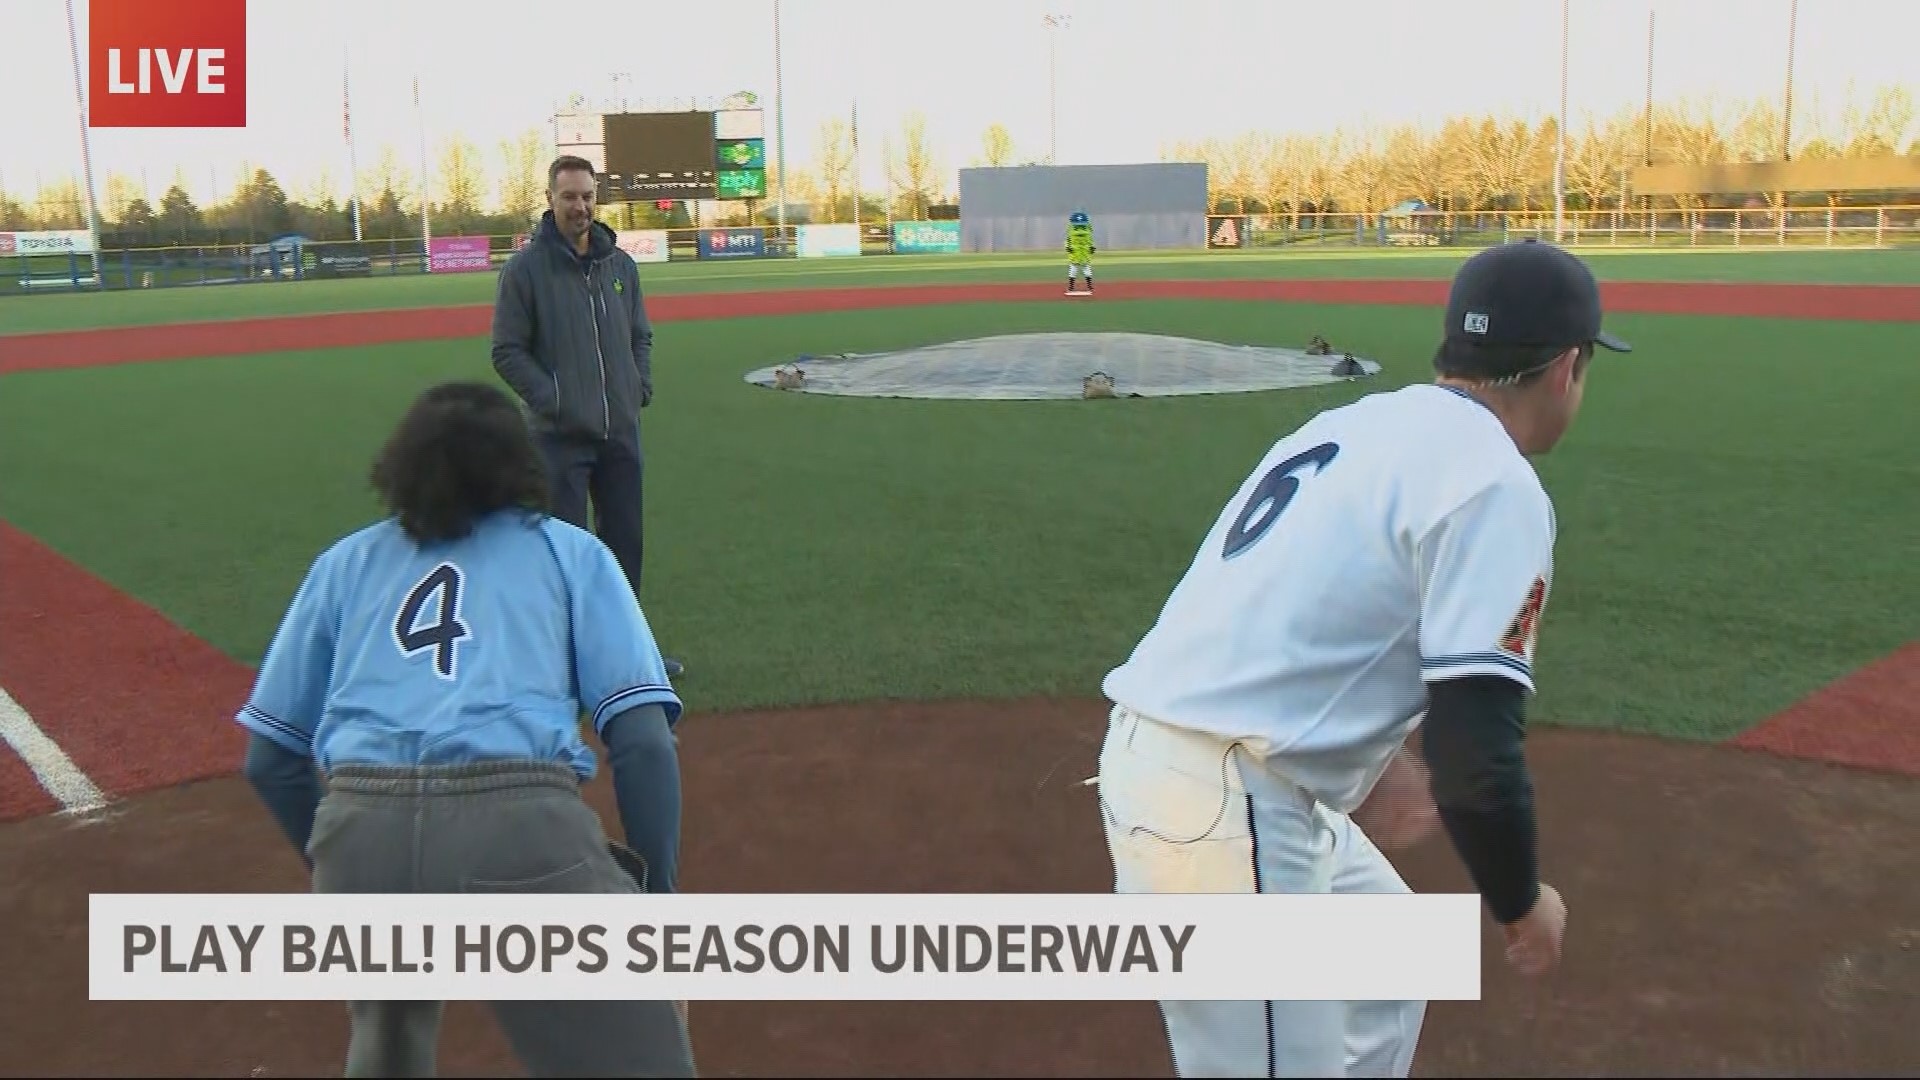 The Hillsboro Hops season is hosting their first ever Tacos & Tequila night on Thursday night. The Hops also plan to unveil a brand new ballpark next year.